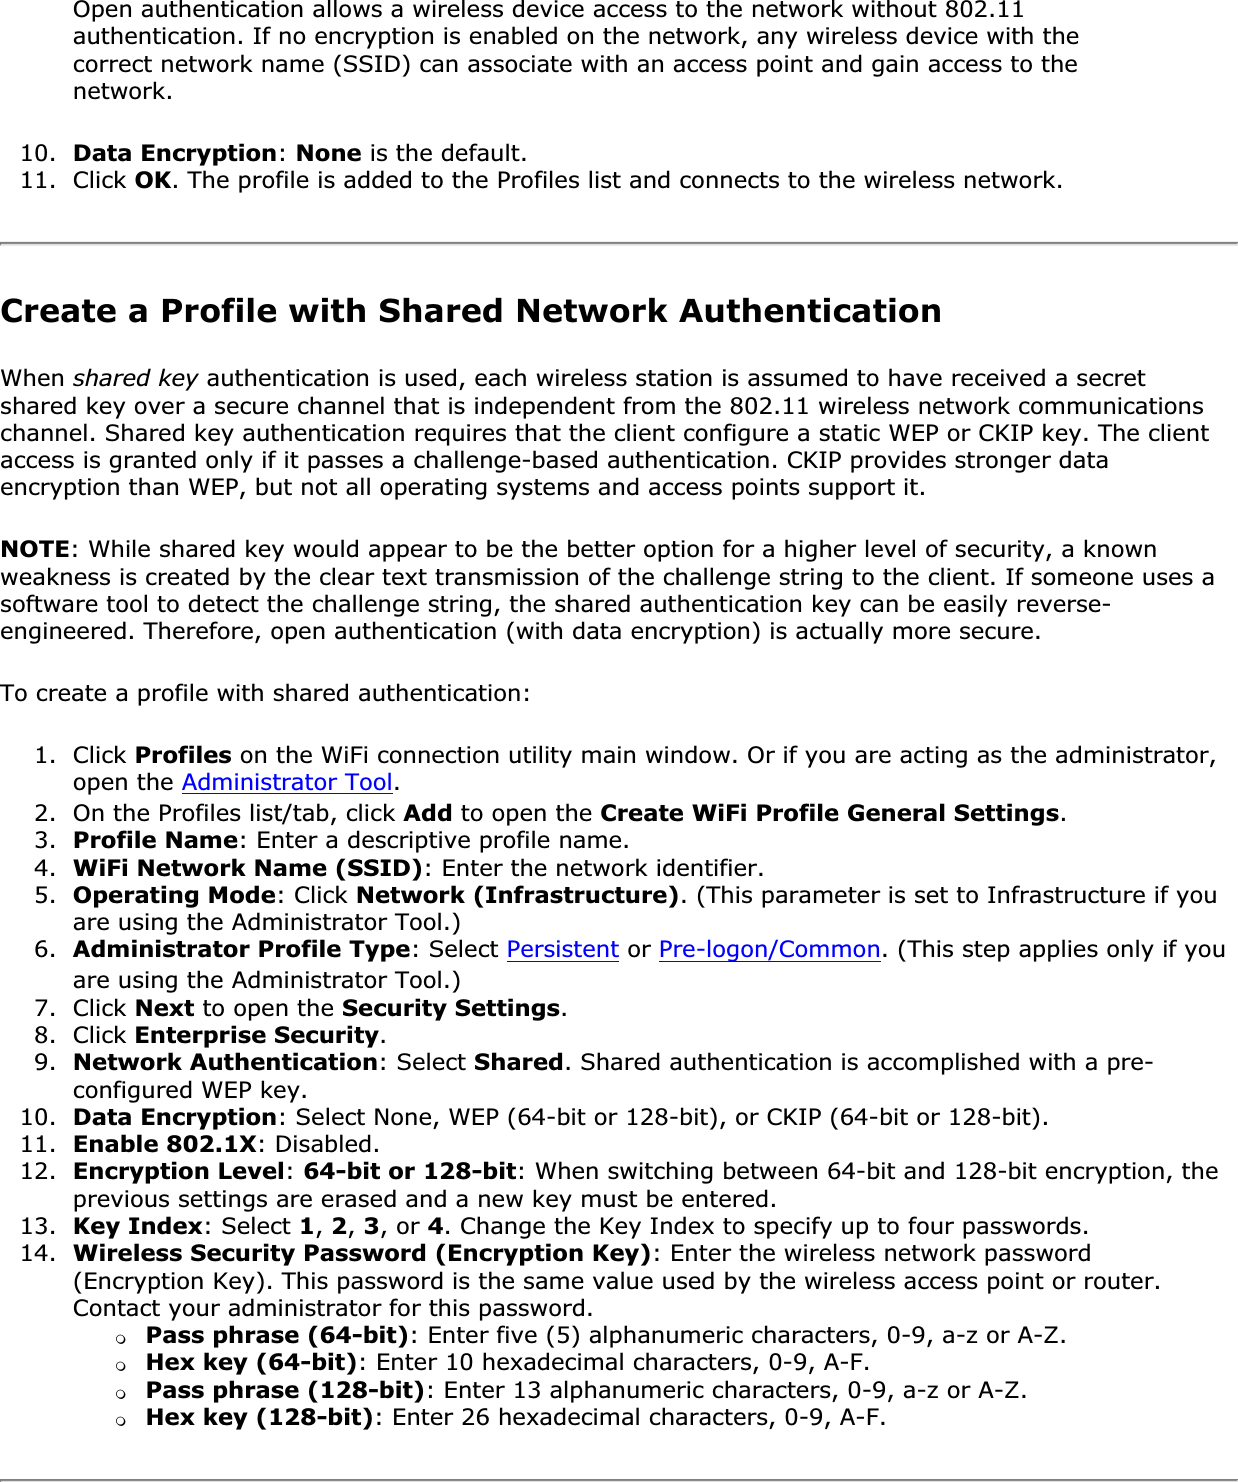 Open authentication allows a wireless device access to the network without 802.11 authentication. If no encryption is enabled on the network, any wireless device with the correct network name (SSID) can associate with an access point and gain access to the network.10. Data Encryption:None is the default.11. Click OK. The profile is added to the Profiles list and connects to the wireless network.Create a Profile with Shared Network AuthenticationWhen shared key authentication is used, each wireless station is assumed to have received a secret shared key over a secure channel that is independent from the 802.11 wireless network communications channel. Shared key authentication requires that the client configure a static WEP or CKIP key. The client access is granted only if it passes a challenge-based authentication. CKIP provides stronger data encryption than WEP, but not all operating systems and access points support it.NOTE: While shared key would appear to be the better option for a higher level of security, a known weakness is created by the clear text transmission of the challenge string to the client. If someone uses a software tool to detect the challenge string, the shared authentication key can be easily reverse-engineered. Therefore, open authentication (with data encryption) is actually more secure.To create a profile with shared authentication:1. Click Profiles on the WiFi connection utility main window. Or if you are acting as the administrator, open the Administrator Tool.2. On the Profiles list/tab, click Add to open the Create WiFi Profile General Settings.3. Profile Name: Enter a descriptive profile name.4. WiFi Network Name (SSID): Enter the network identifier.5. Operating Mode: Click Network (Infrastructure). (This parameter is set to Infrastructure if you are using the Administrator Tool.)6. Administrator Profile Type: Select Persistent or Pre-logon/Common. (This step applies only if you are using the Administrator Tool.)7. Click Next to open the Security Settings.8. Click Enterprise Security.9. Network Authentication: Select Shared. Shared authentication is accomplished with a pre-configured WEP key.10. Data Encryption: Select None, WEP (64-bit or 128-bit), or CKIP (64-bit or 128-bit).11. Enable 802.1X: Disabled.12. Encryption Level:64-bit or 128-bit: When switching between 64-bit and 128-bit encryption, the previous settings are erased and a new key must be entered.13. Key Index: Select 1, 2,3, or 4. Change the Key Index to specify up to four passwords.14. Wireless Security Password (Encryption Key): Enter the wireless network password (Encryption Key). This password is the same value used by the wireless access point or router. Contact your administrator for this password.❍Pass phrase (64-bit): Enter five (5) alphanumeric characters, 0-9, a-z or A-Z.❍Hex key (64-bit): Enter 10 hexadecimal characters, 0-9, A-F.❍Pass phrase (128-bit): Enter 13 alphanumeric characters, 0-9, a-z or A-Z.❍Hex key (128-bit): Enter 26 hexadecimal characters, 0-9, A-F.